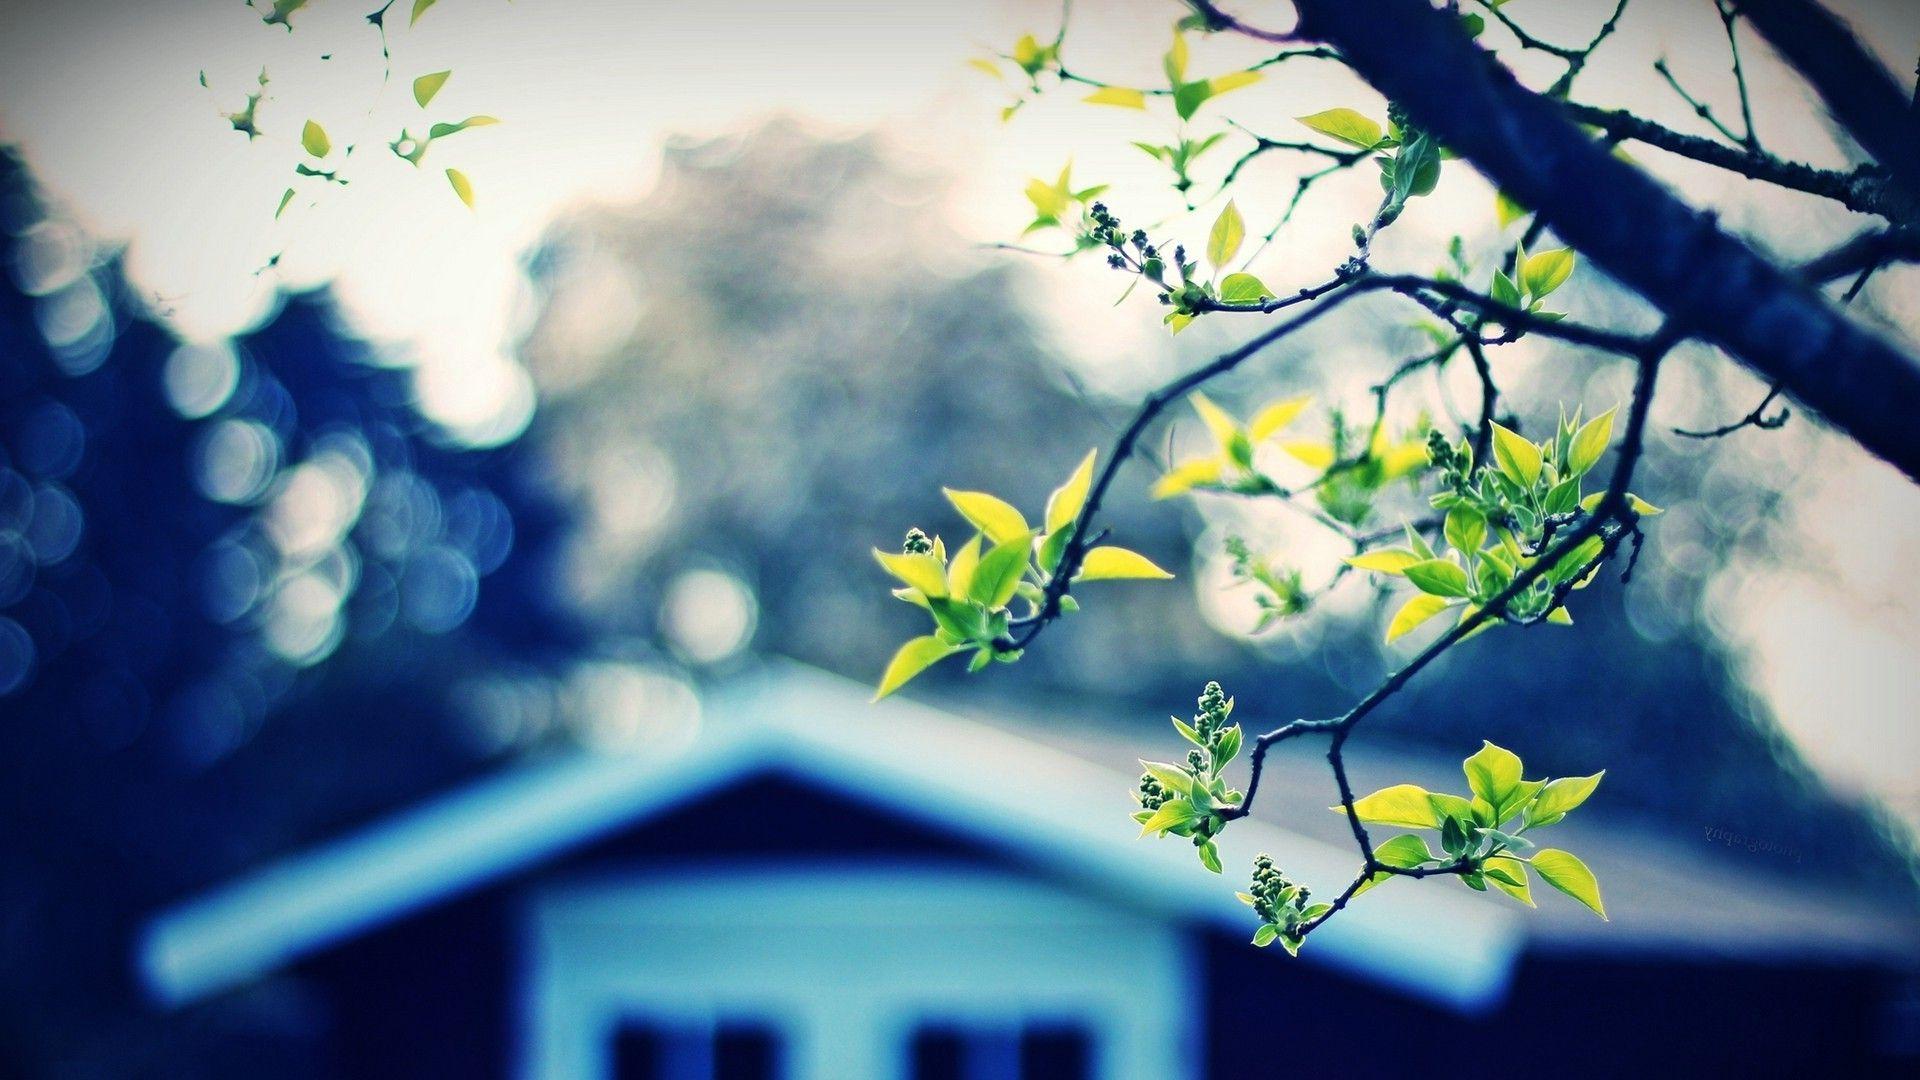 Tree and House HD 1080p Wallpaper Download. HD Wallpaper Source